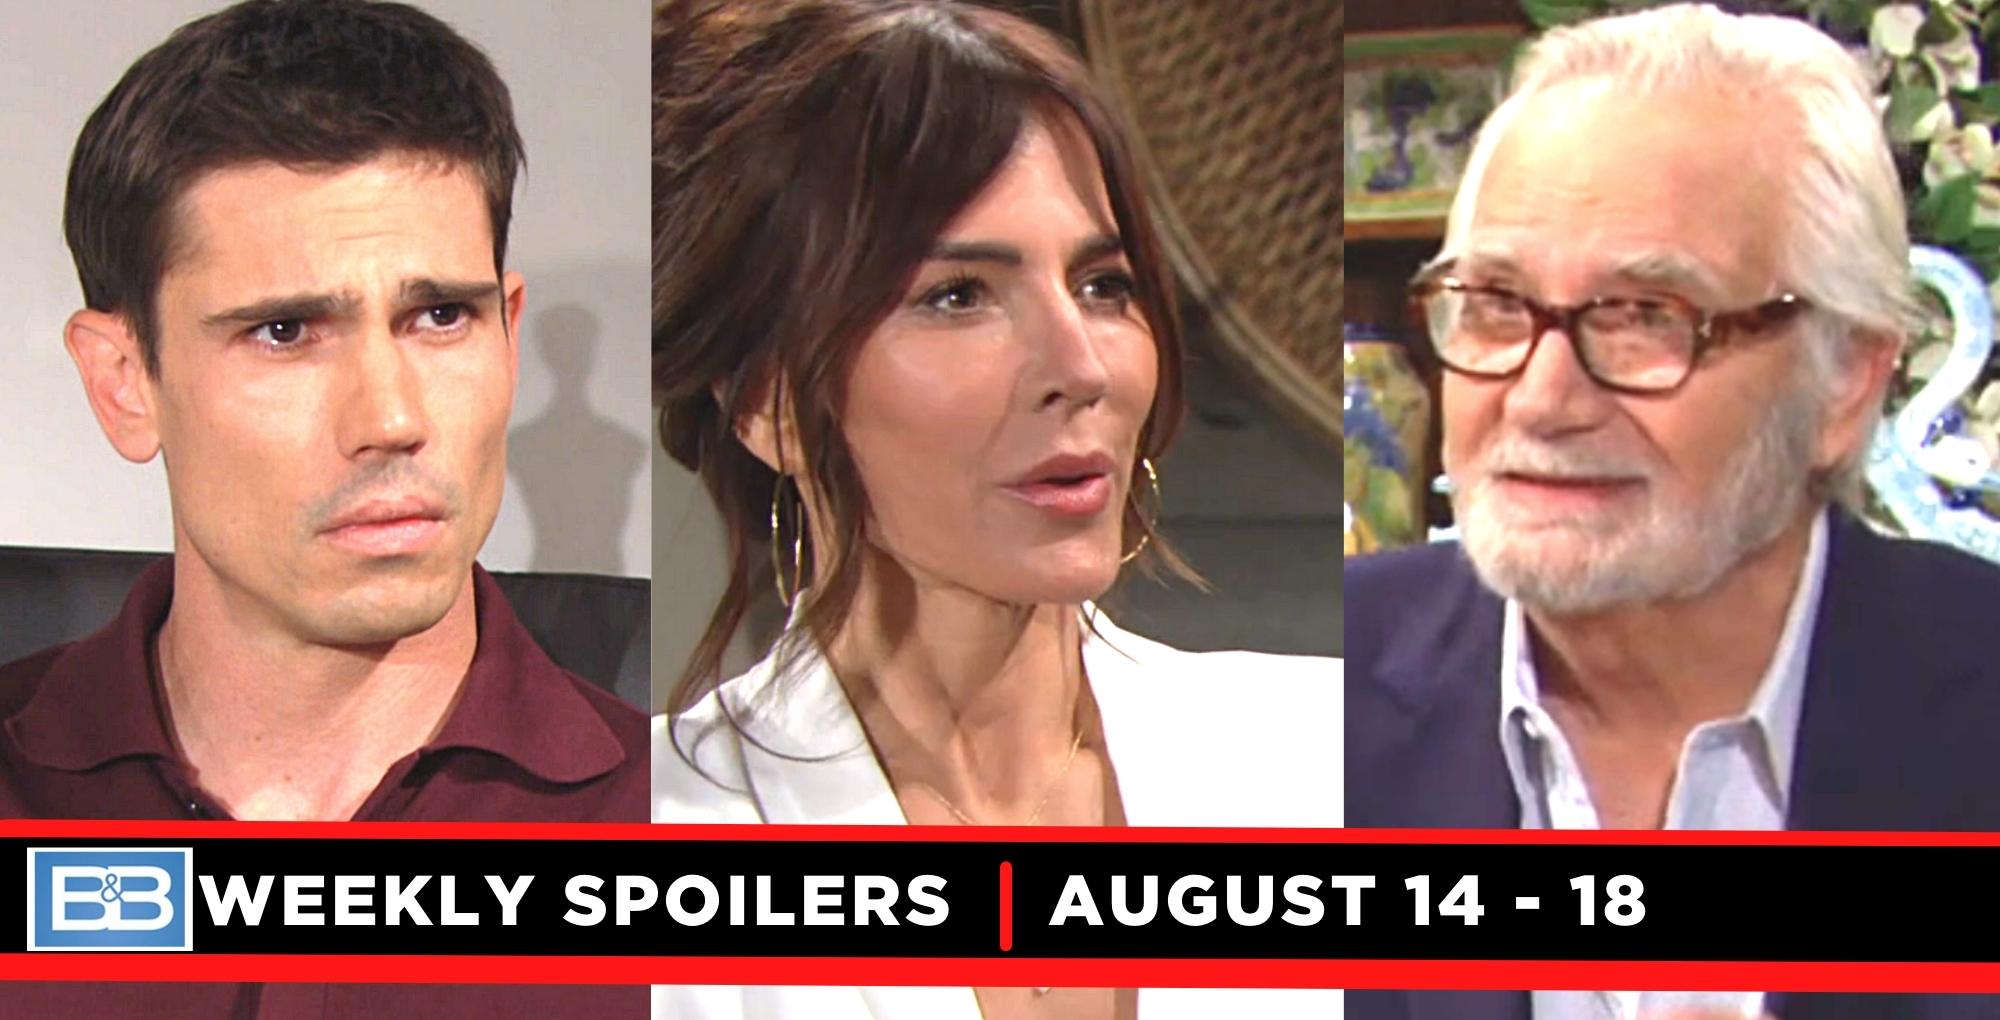 weekly the bold and the beautiful spoilers for august 14-18, 2023 have three images, finn, taylor, eric.